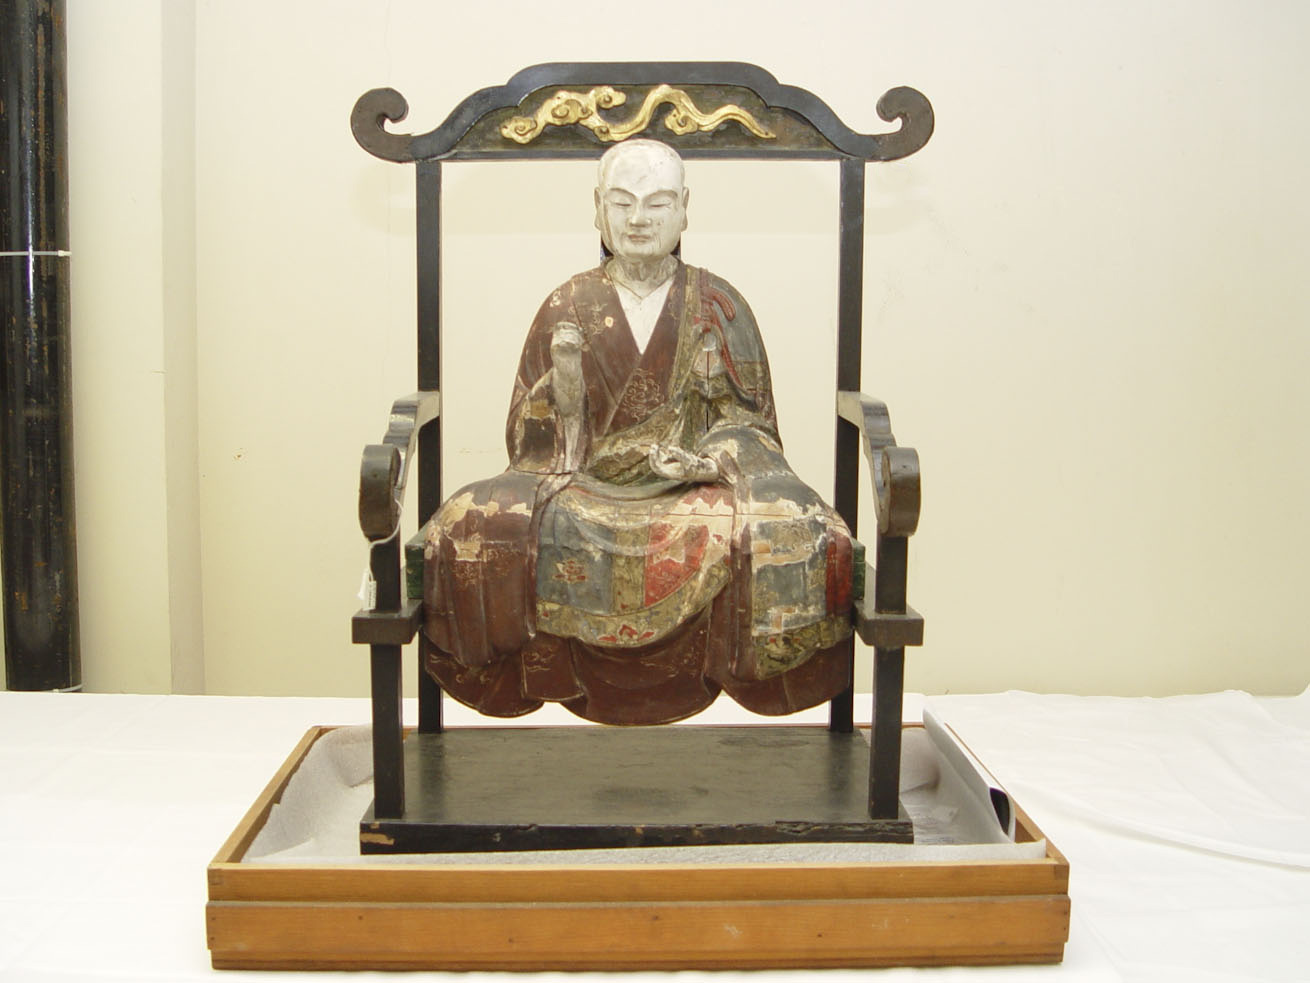 This Japanese polychrome wood statue is dated to the mid c.18th CE.  The statue was assembled from multiple pieces of wood which were joined with wooden dowels.  The wood structure was then covered with a white gesso and the object was painted.  Cracks have opened in the statue and there has been at least one previous (undocumented) restoration attempt.